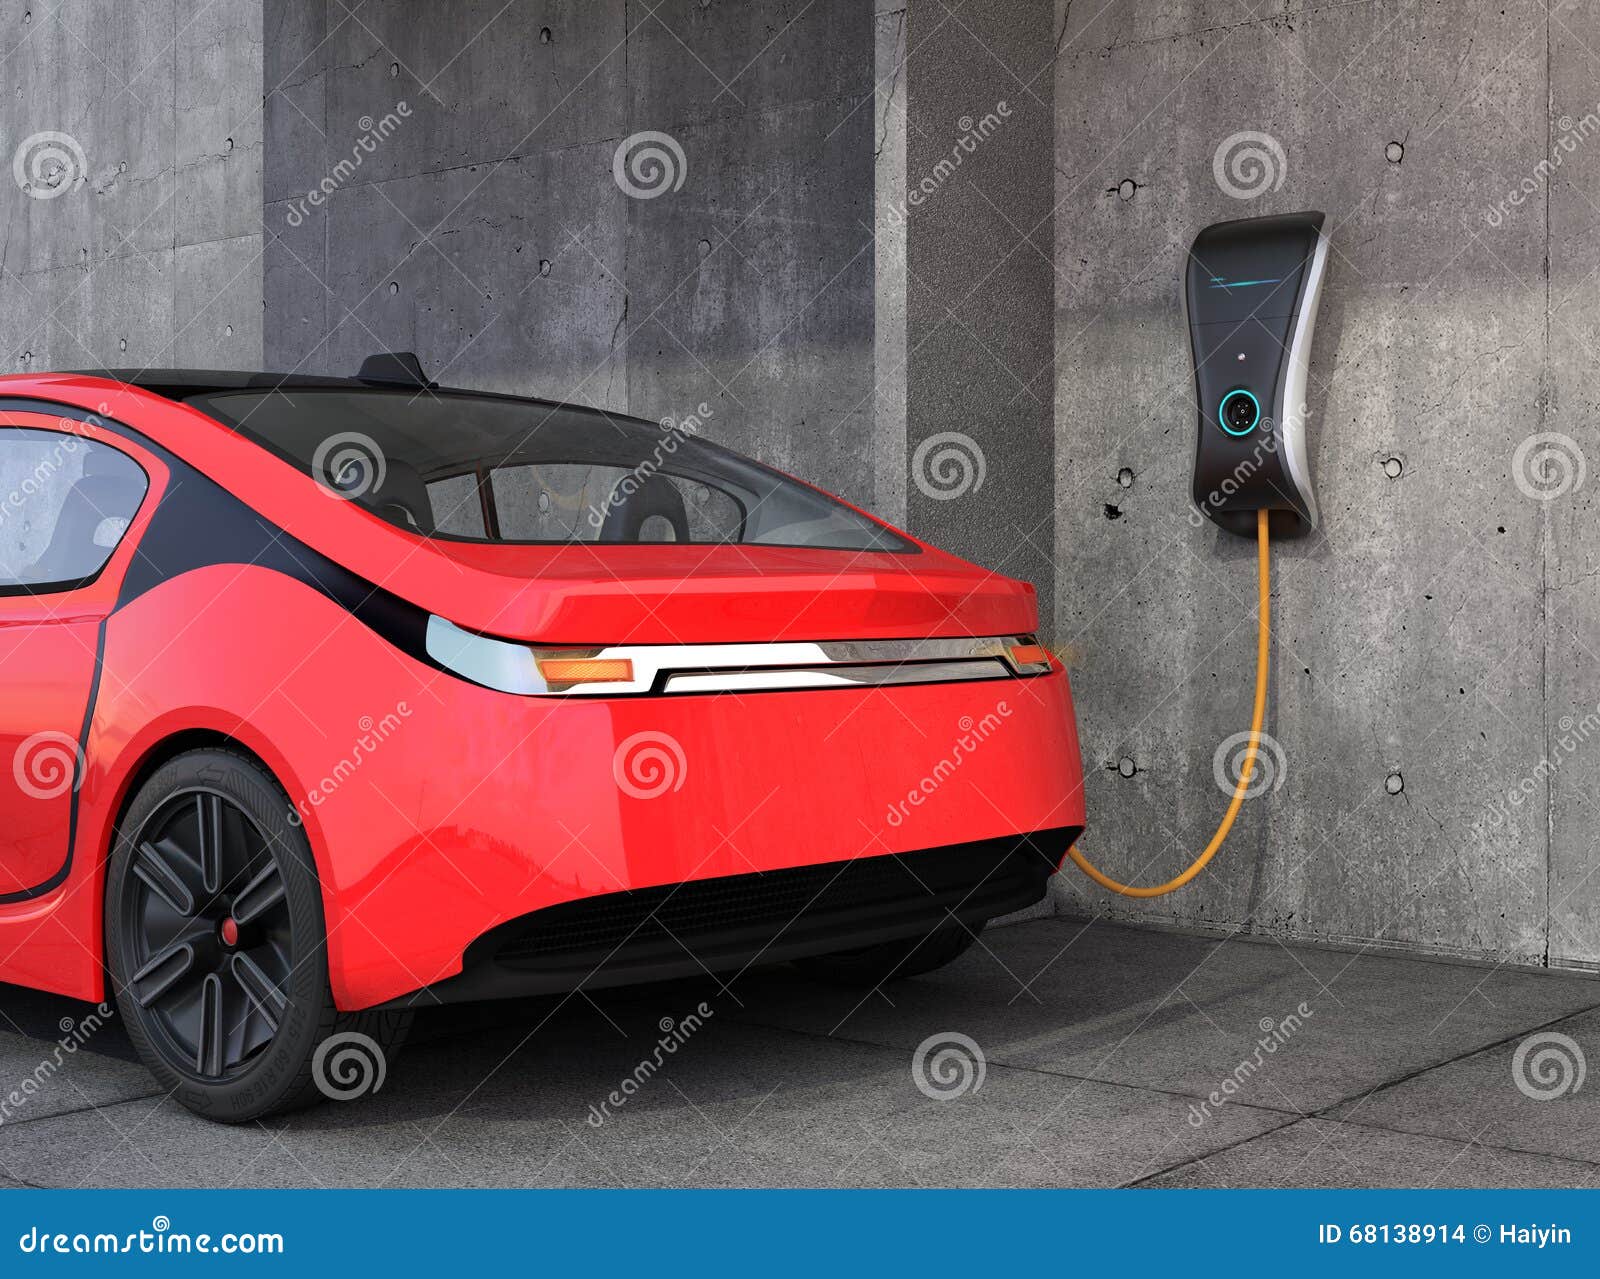 electric vehicle charging station for home.